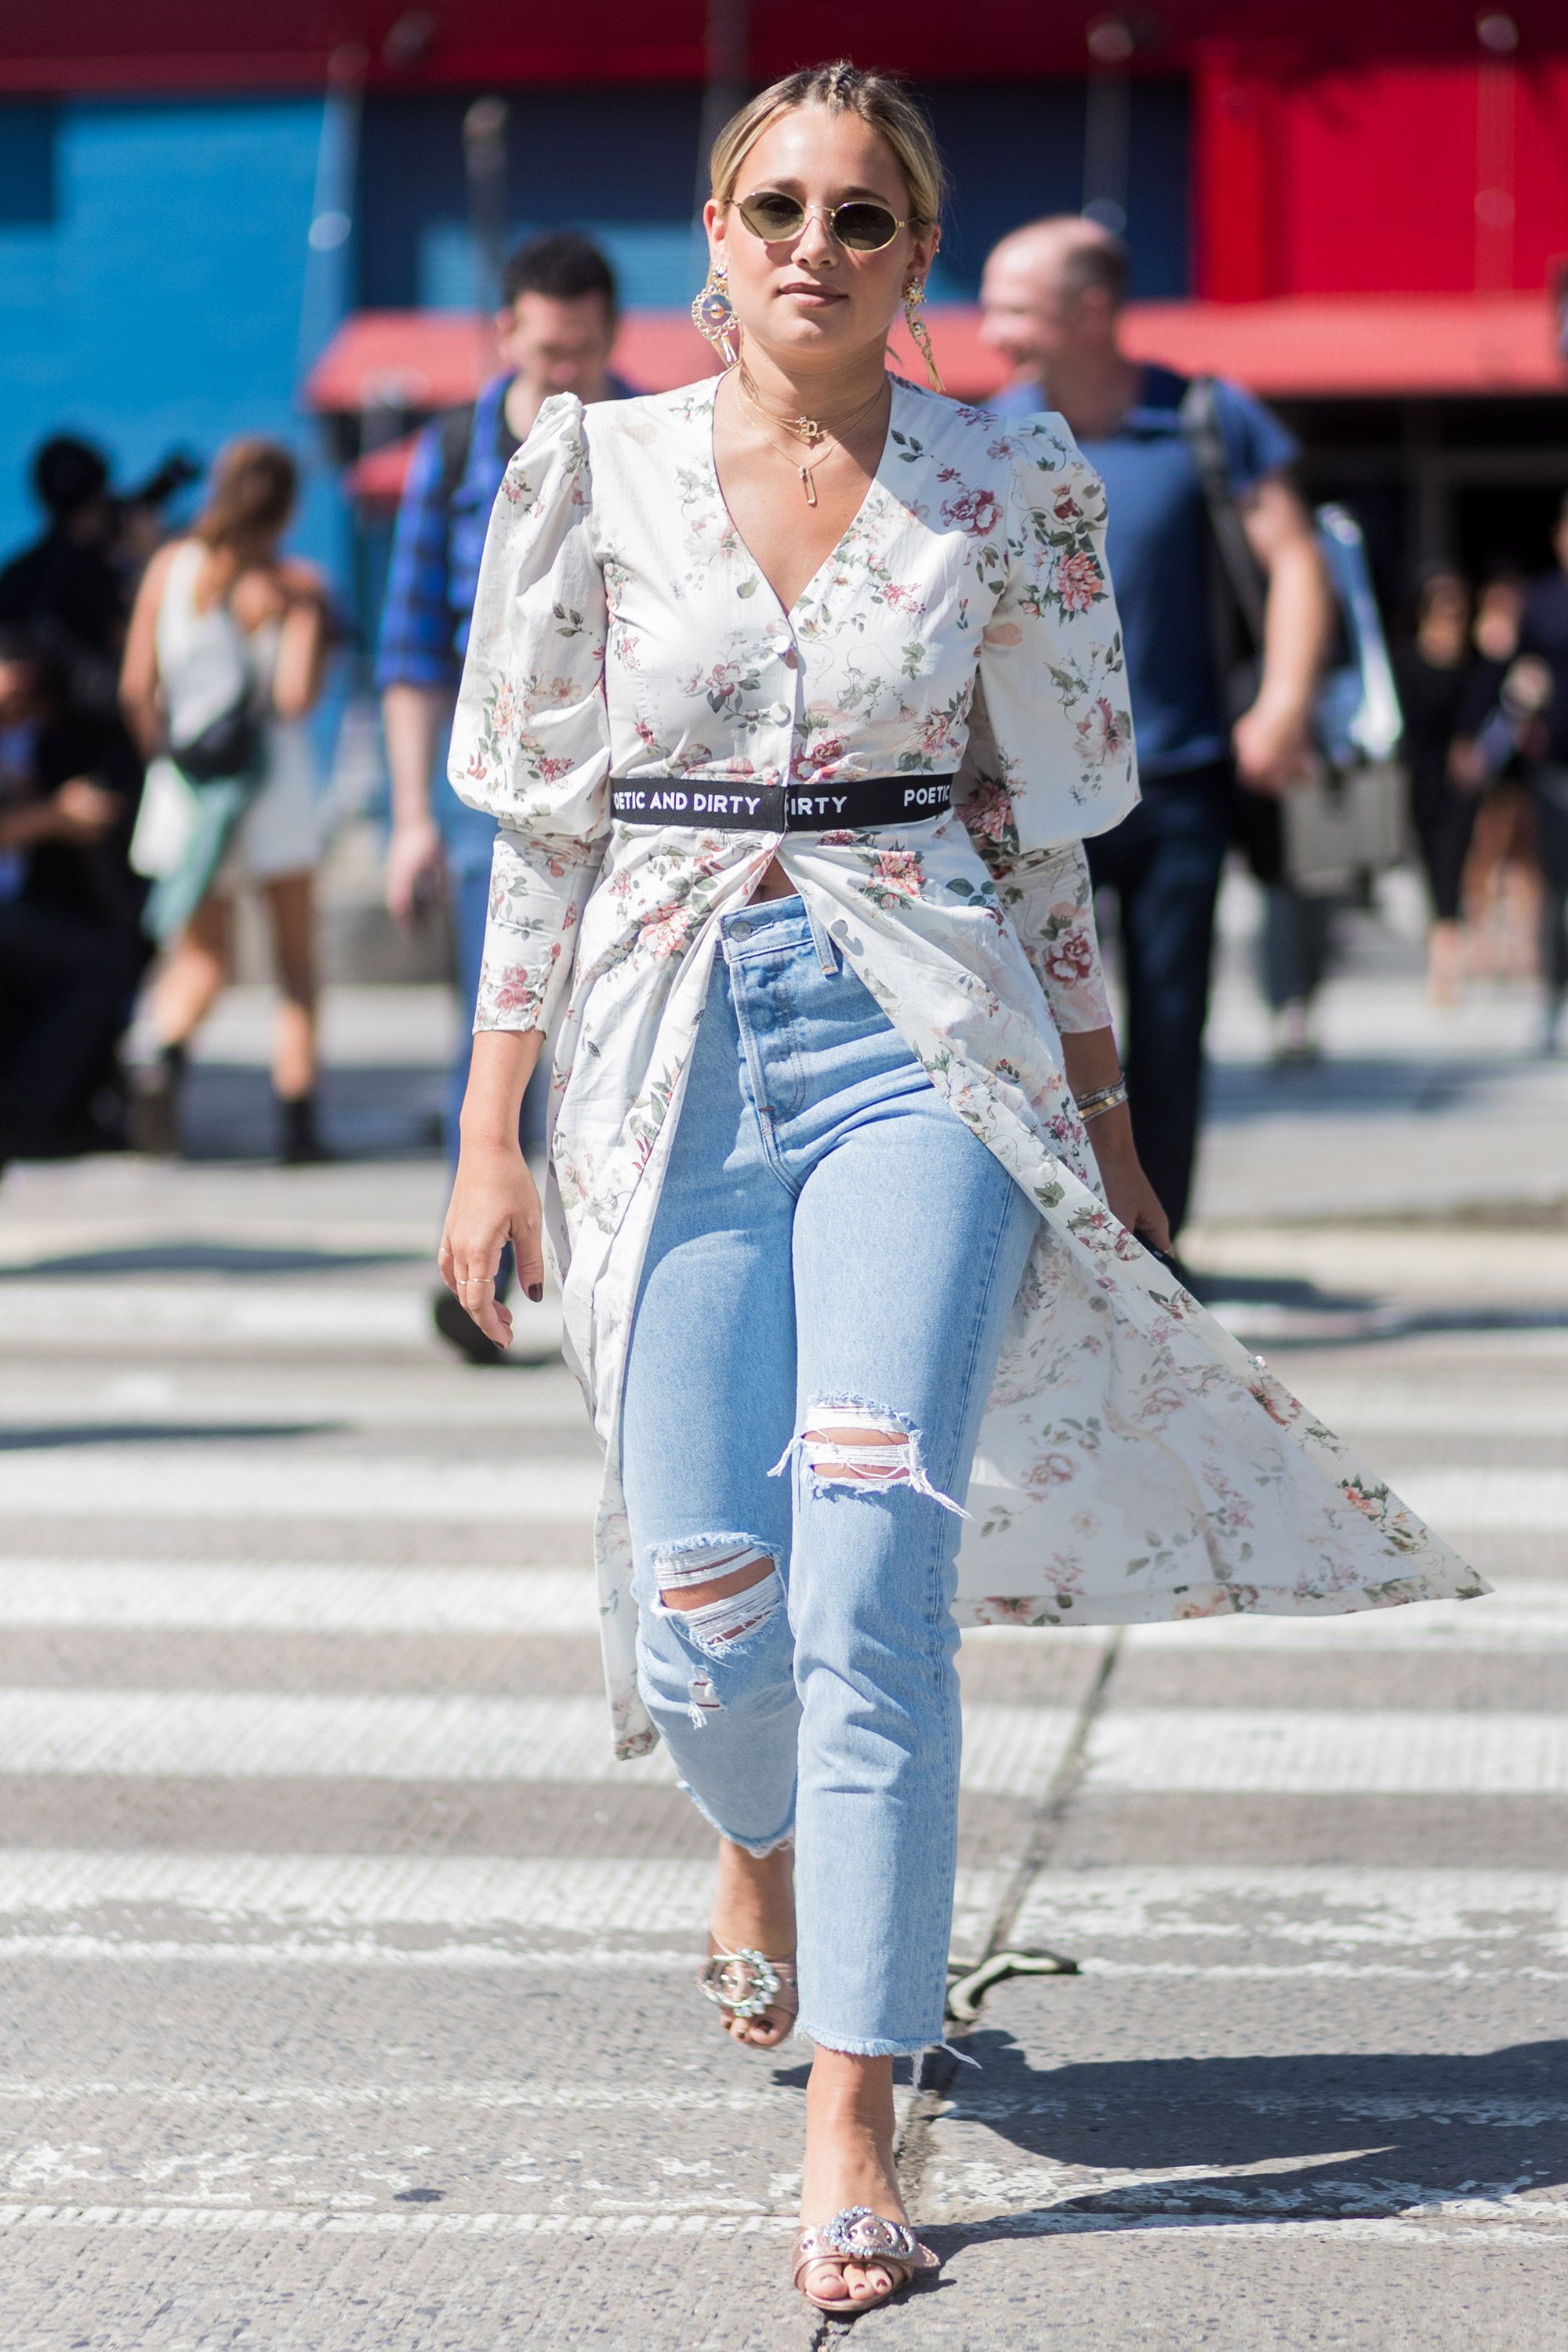 10 Long Jean Skirt Outfits That Prove You Need a Denim Maxi, ASAP